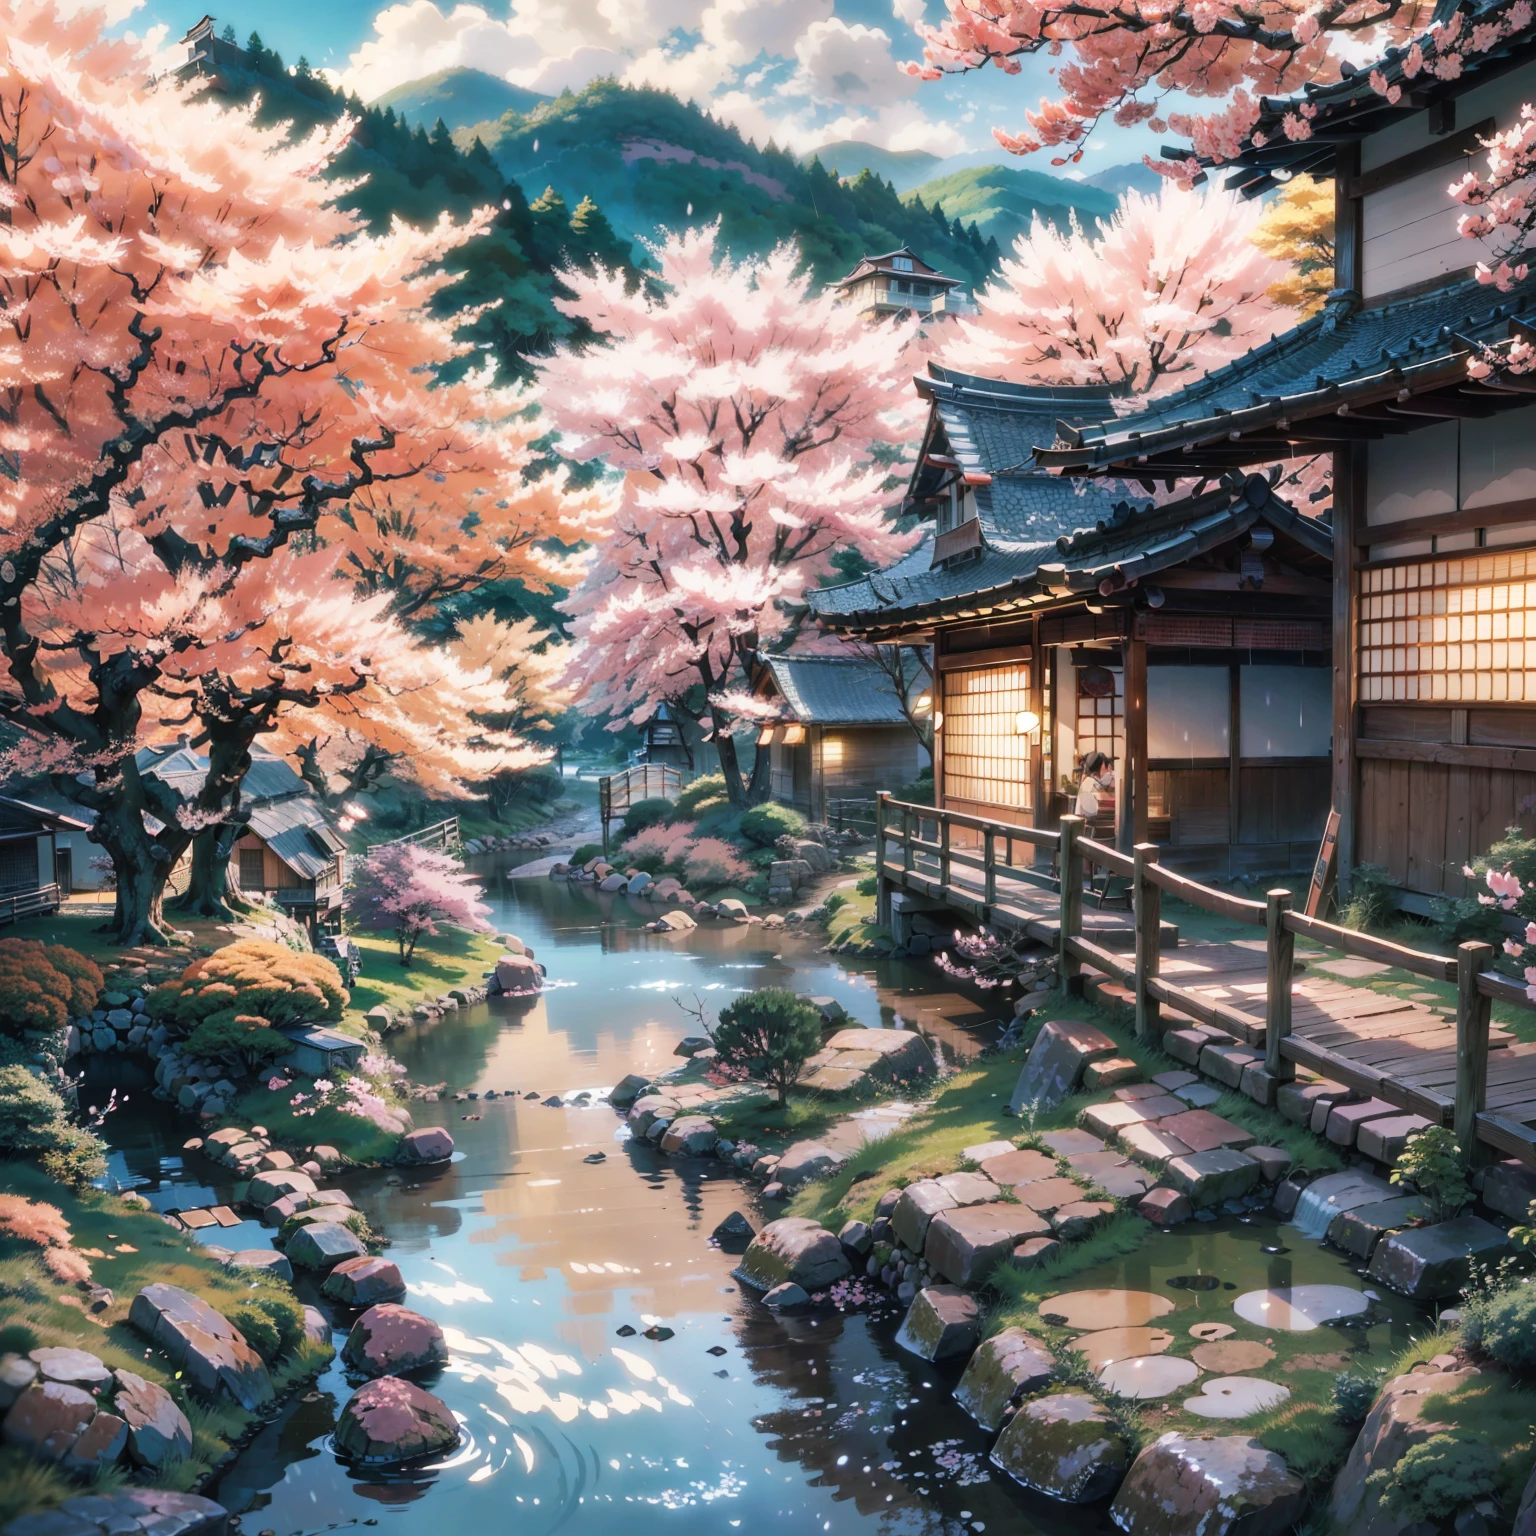 anime scenery of a japanese village with a stream and a house, anime background art. scenic background, scenery artwork, japanese art style, beautiful anime scenery, beautiful anime scene, anime scenery, anime scenery concept art, anime beautiful peace scene, traditional japanese concept art, cherry blossom rain everywhere, anime art wallpaper 4k, anime art wallpaper 4 k
